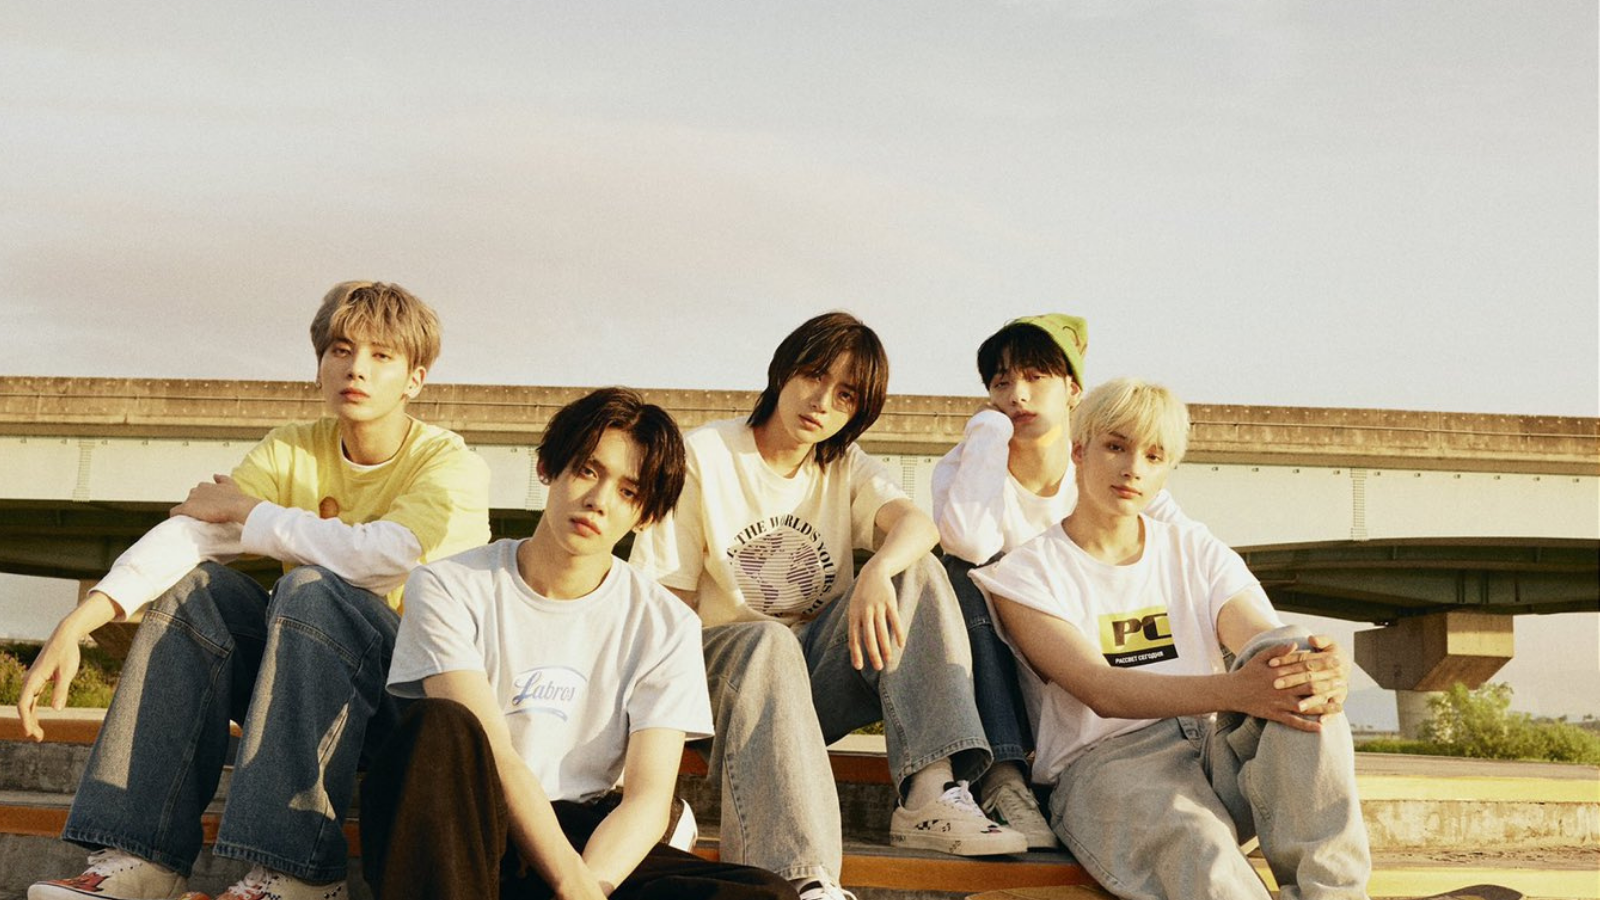 TXT 'Loser=Lover': Where to watch MV featuring Yeonjun's lyrics and Bang PD with Keith Richards' guitar